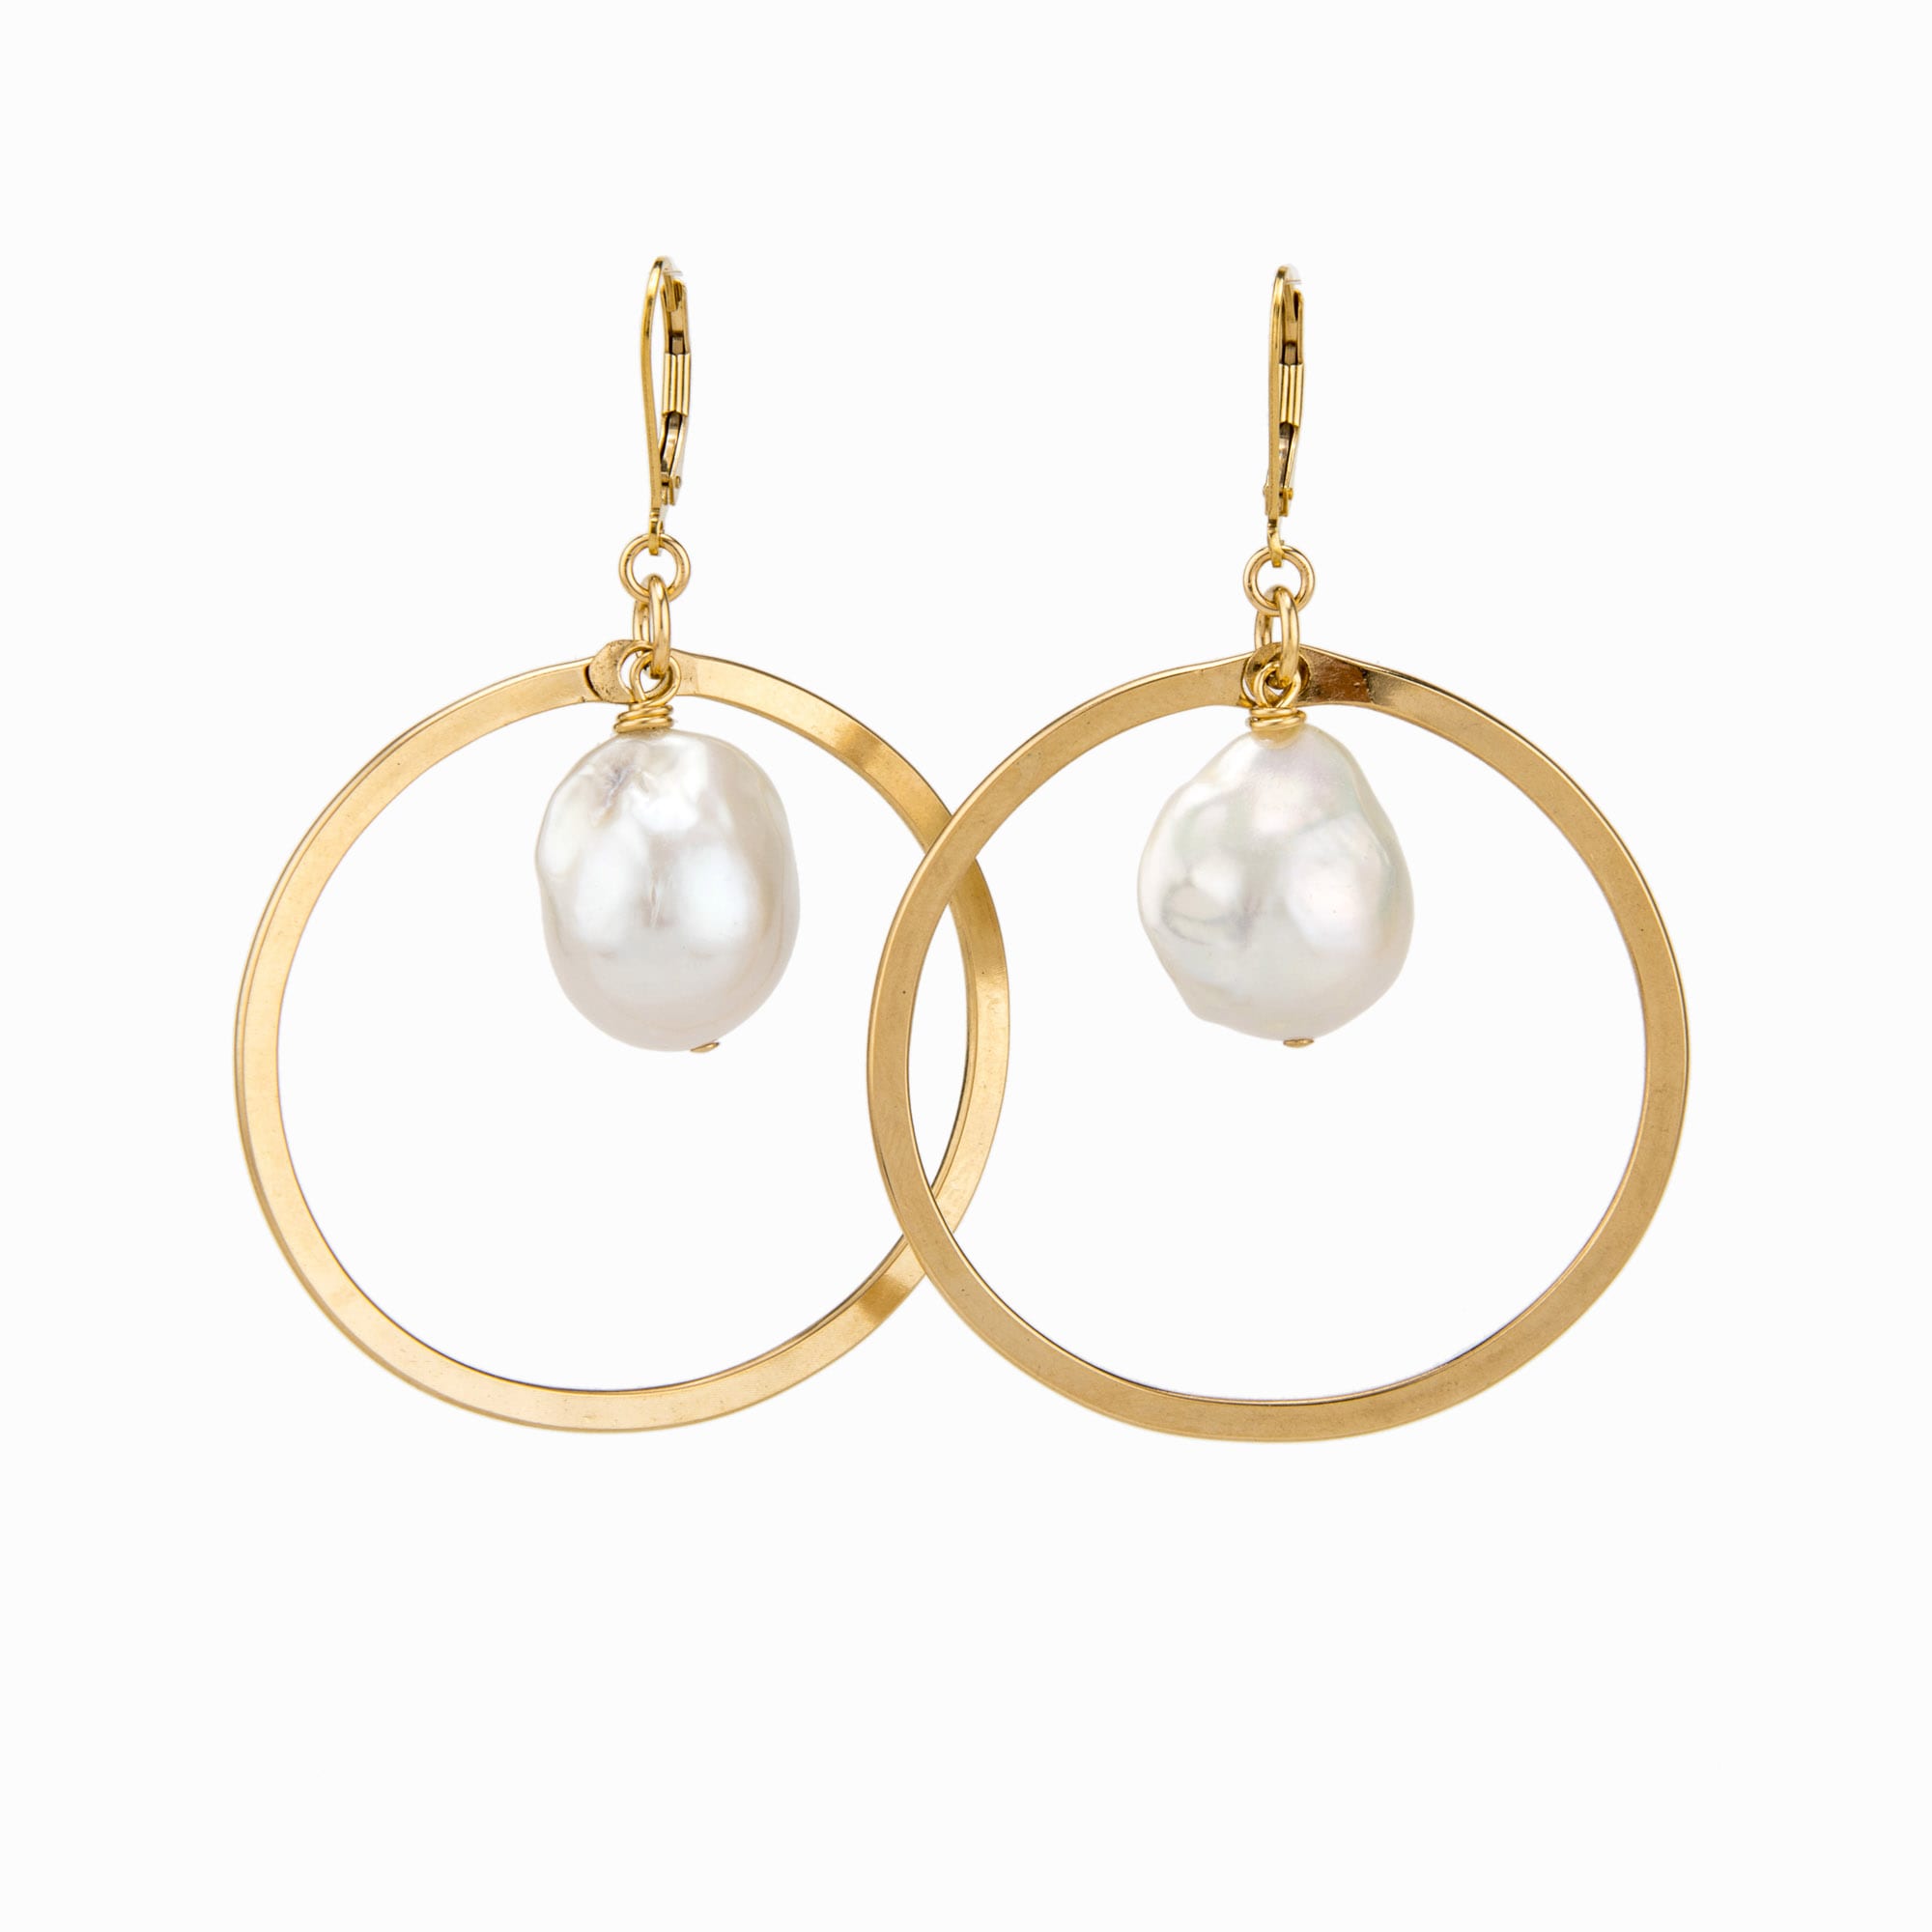 Featured image for “Paris Pearl Earrings”